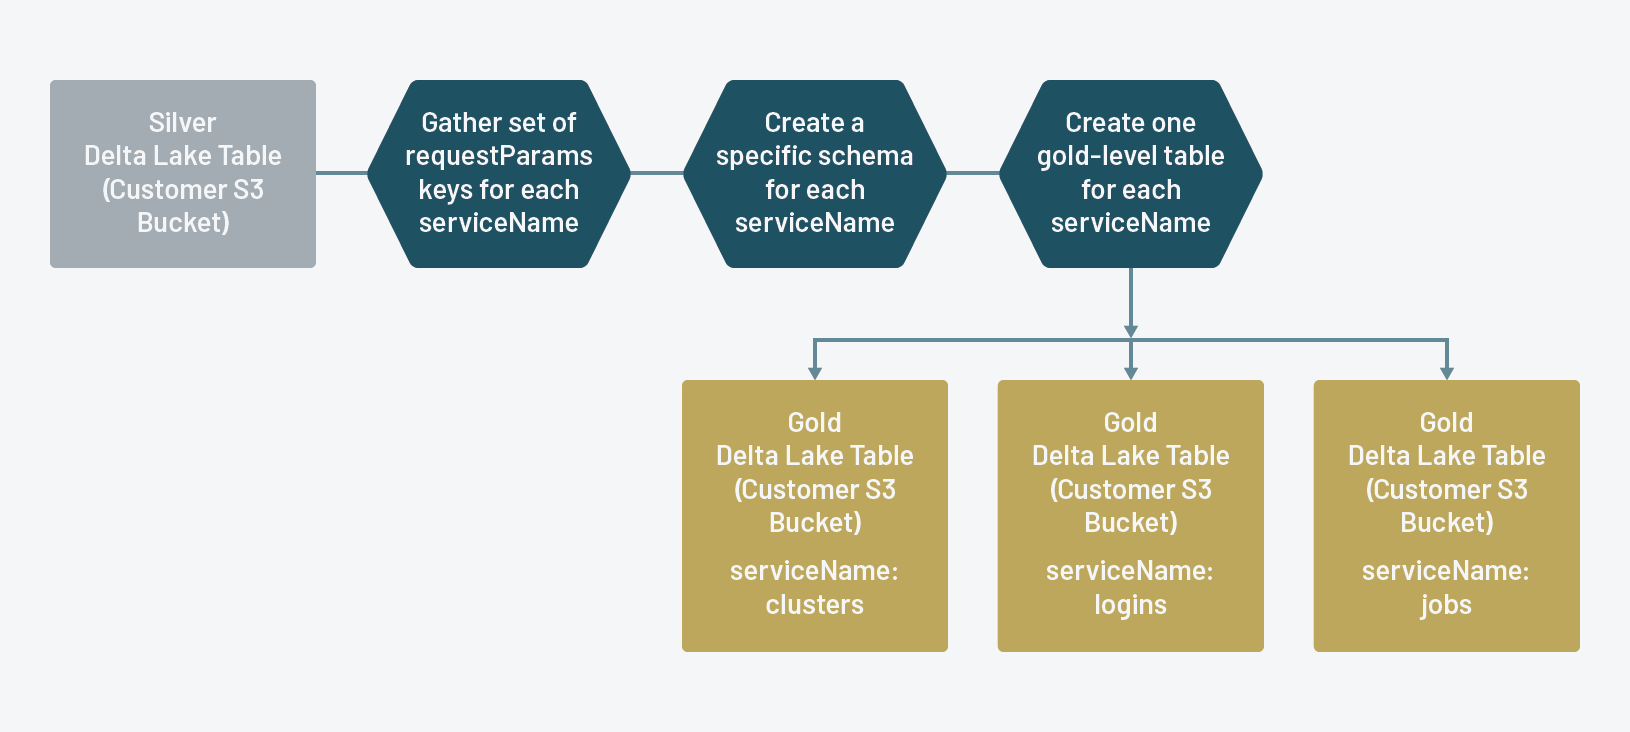 Databricks Silver to Gold Table ETL process, which provides the pared-down analysis required by the workspace administrators.